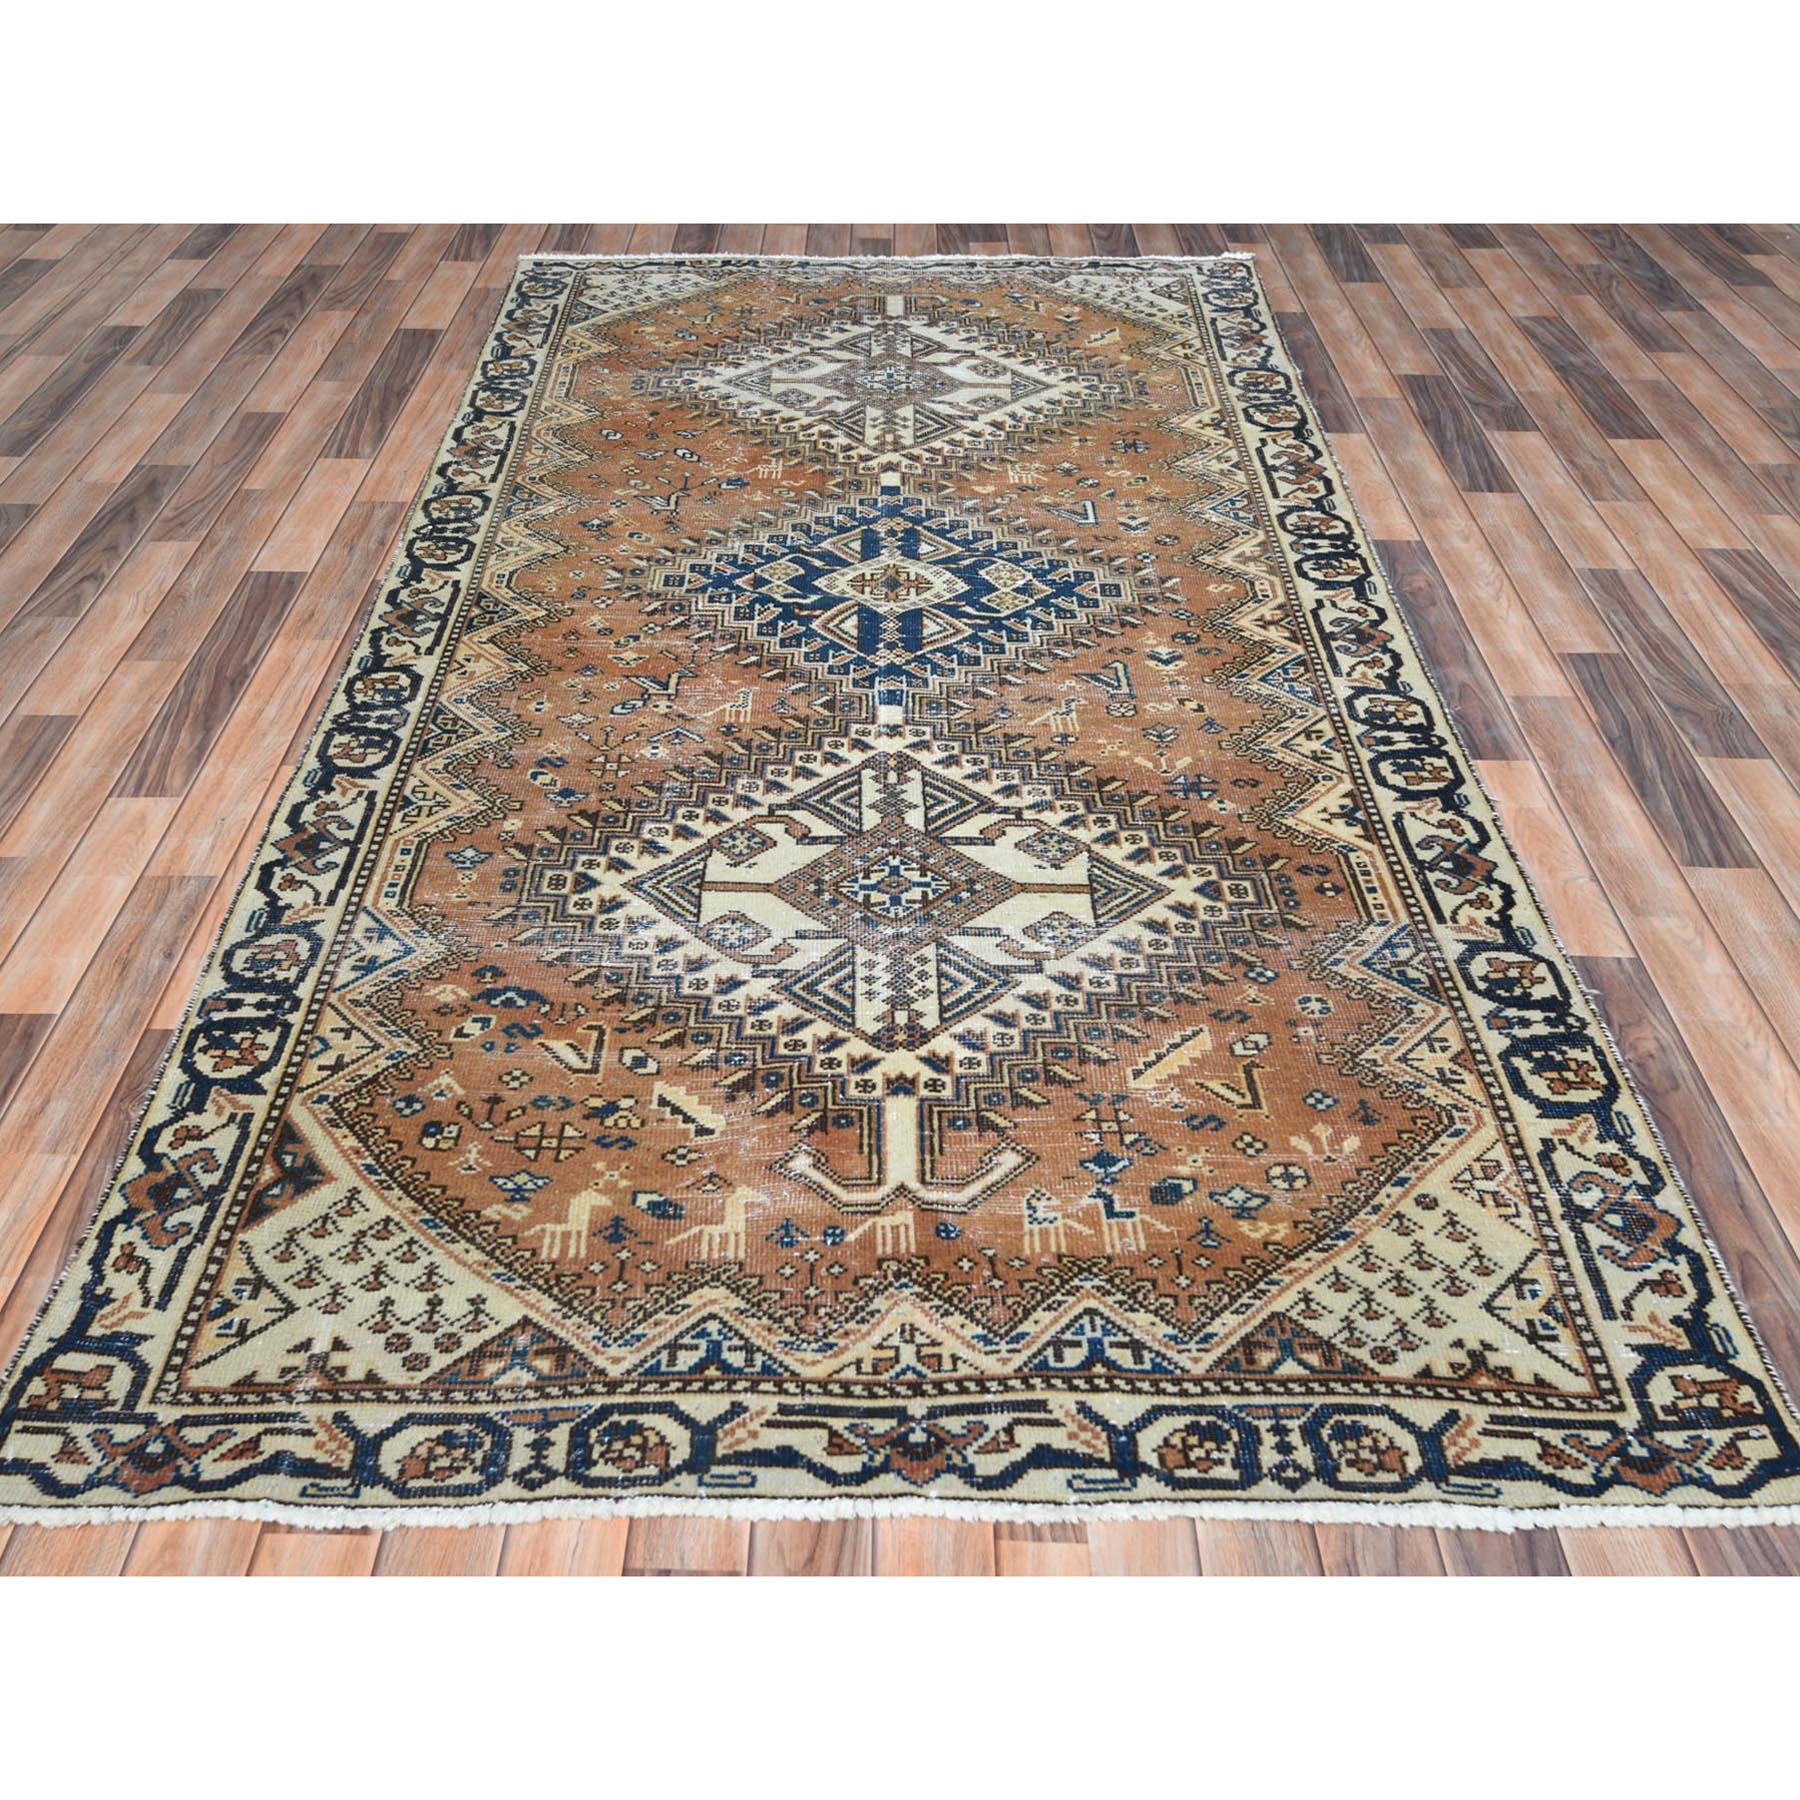 This fabulous hand-knotted carpet has been created and designed for extra strength and durability. This rug has been handcrafted for weeks in the traditional method that is used to make
Exact Rug Size in Feet and Inches : 5'0